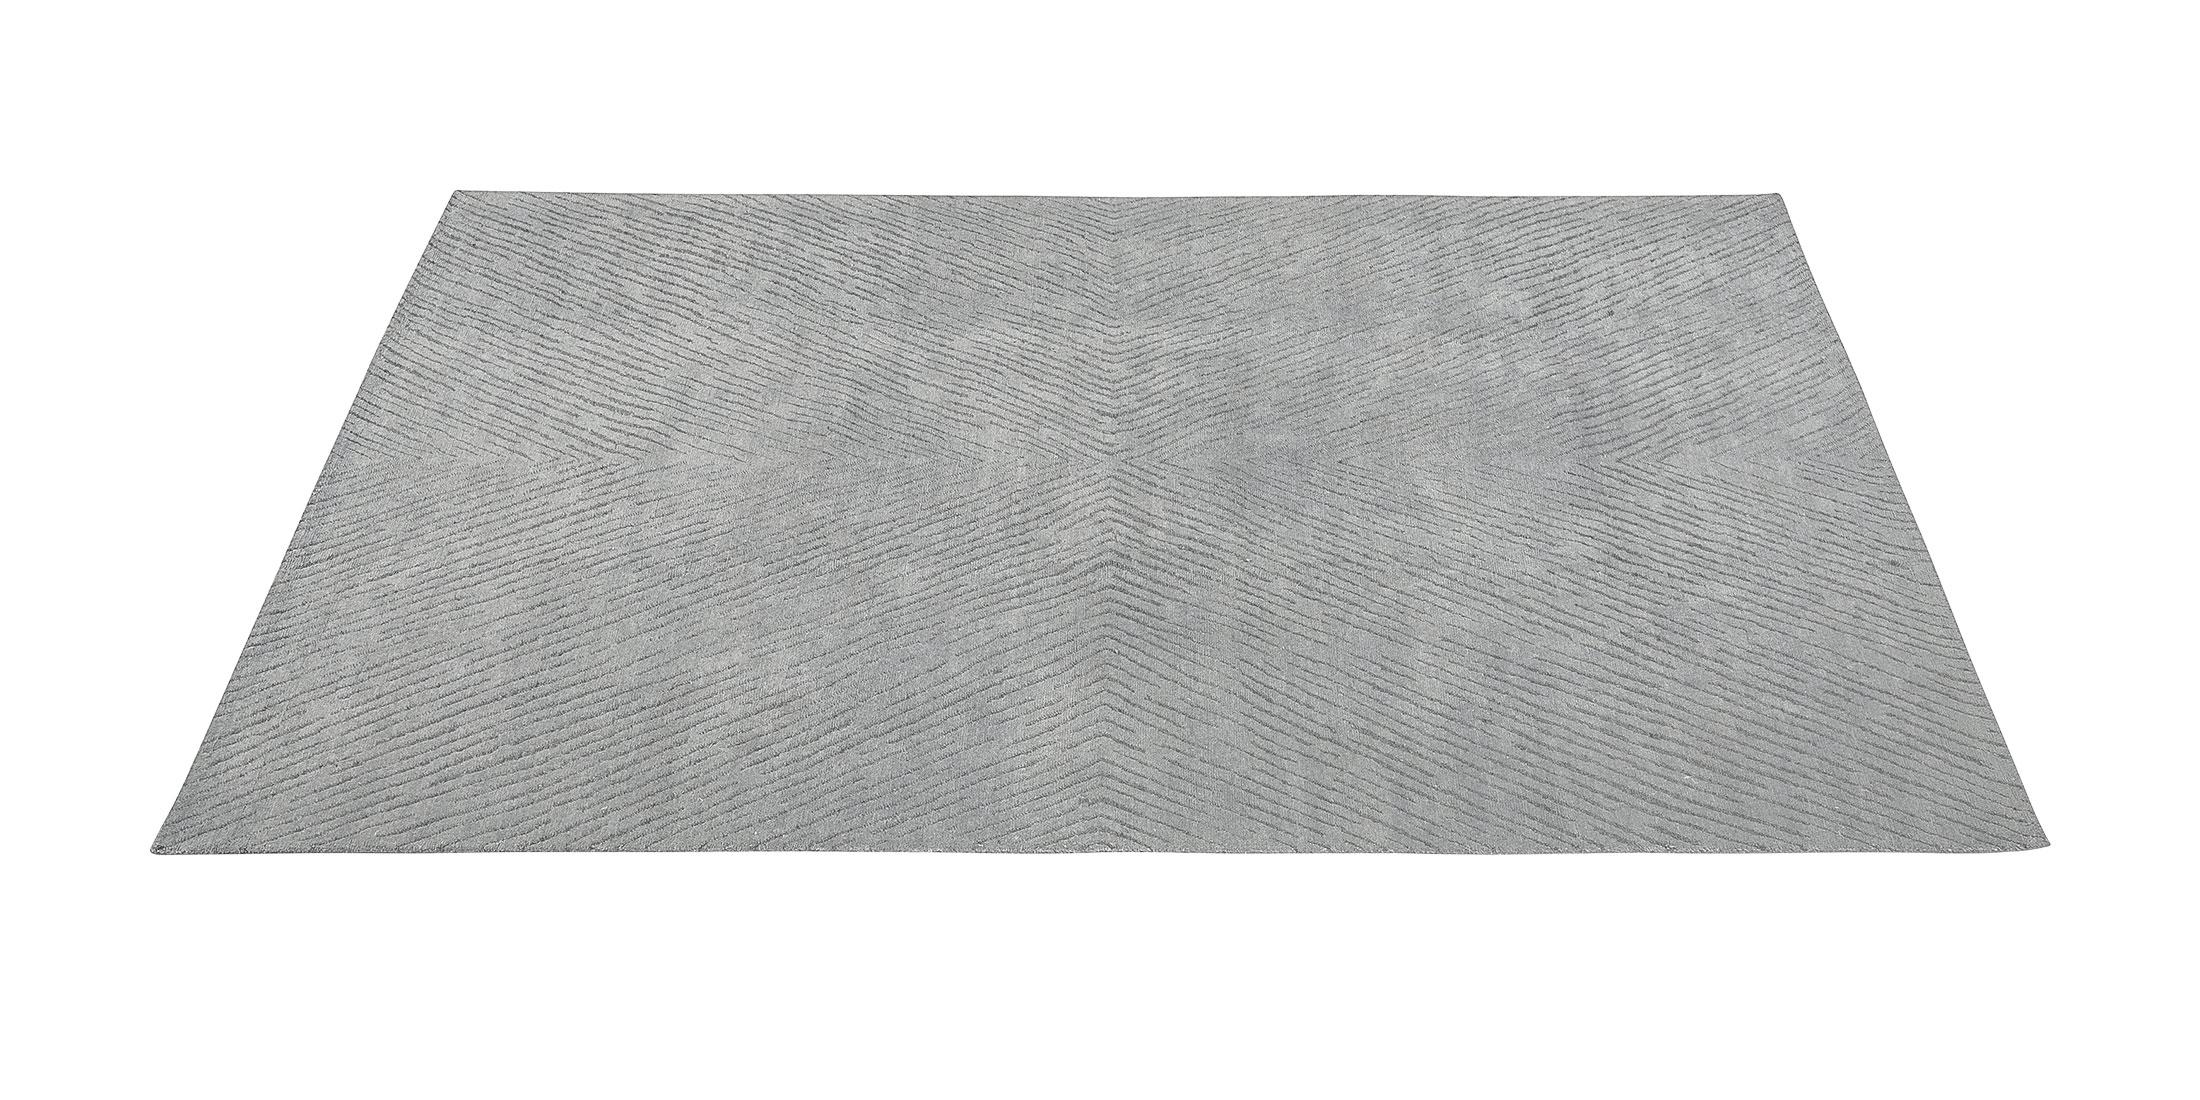 For Sale: Gray (Nickel/Carbon) Ben Soleimani Performance Setta Rug– Handknotted Soft Pile Nickel/Carbon 10'x14' 2